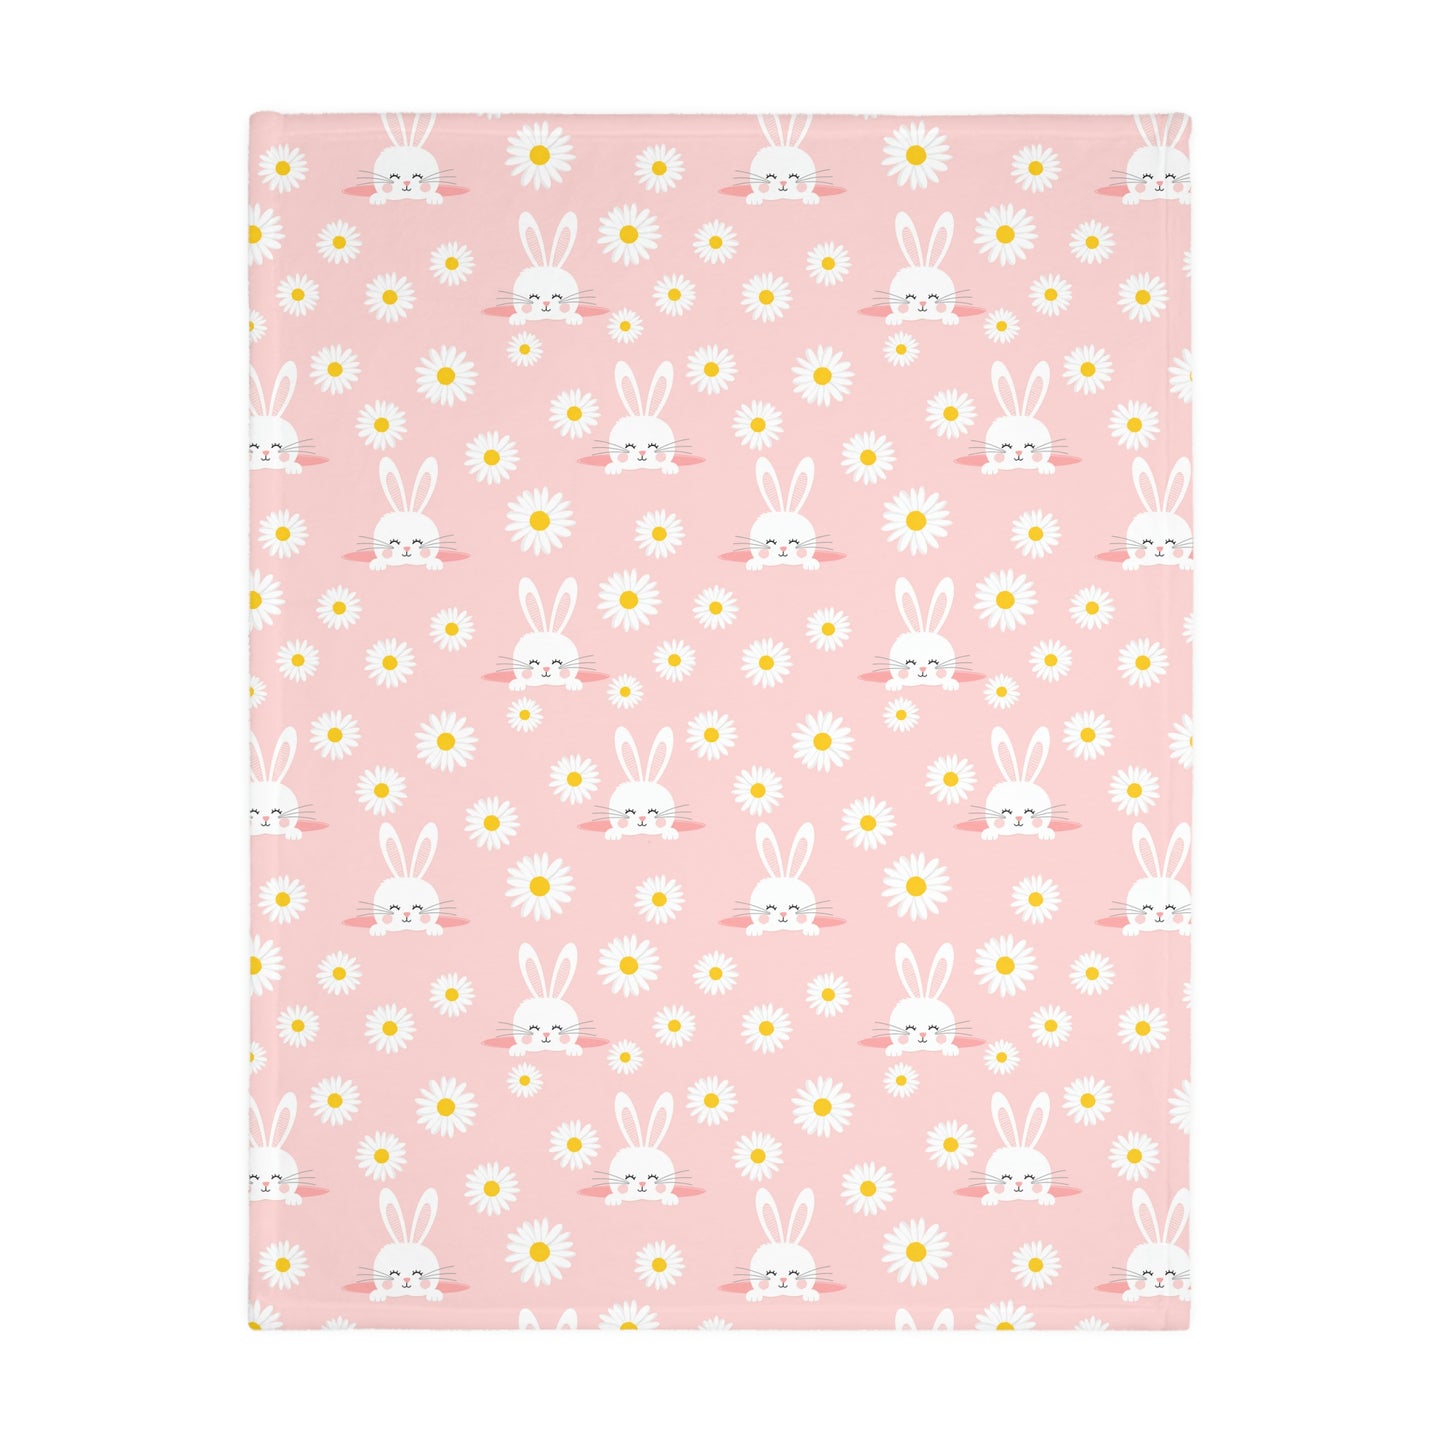 Smiling Bunnies and Daisies Velveteen Minky Blanket (Two-sided print)